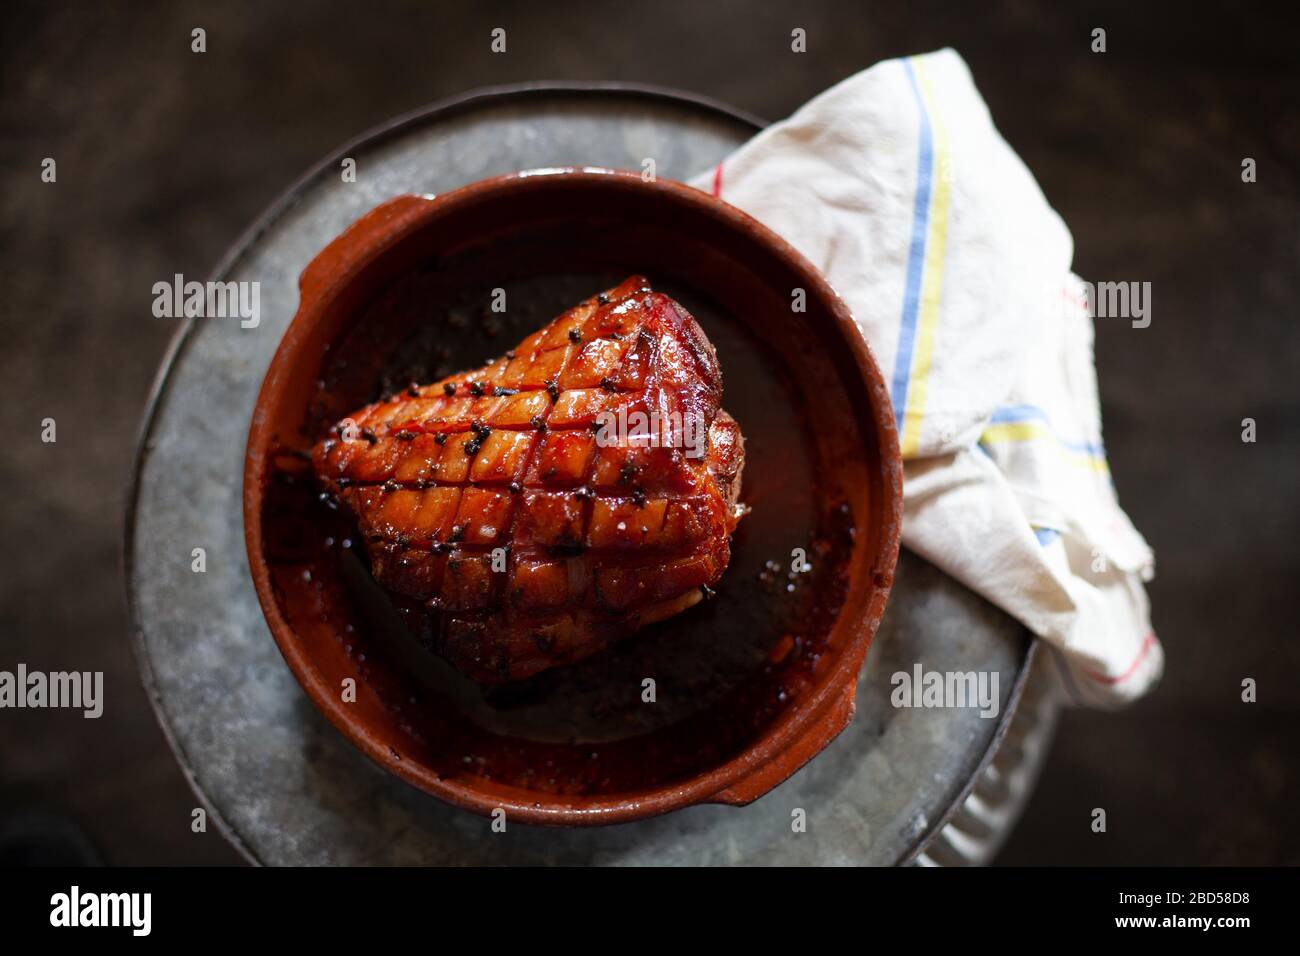 A roasted gammon joint in an earthenware dish on a dark background seasoned with cloves Stock Photo